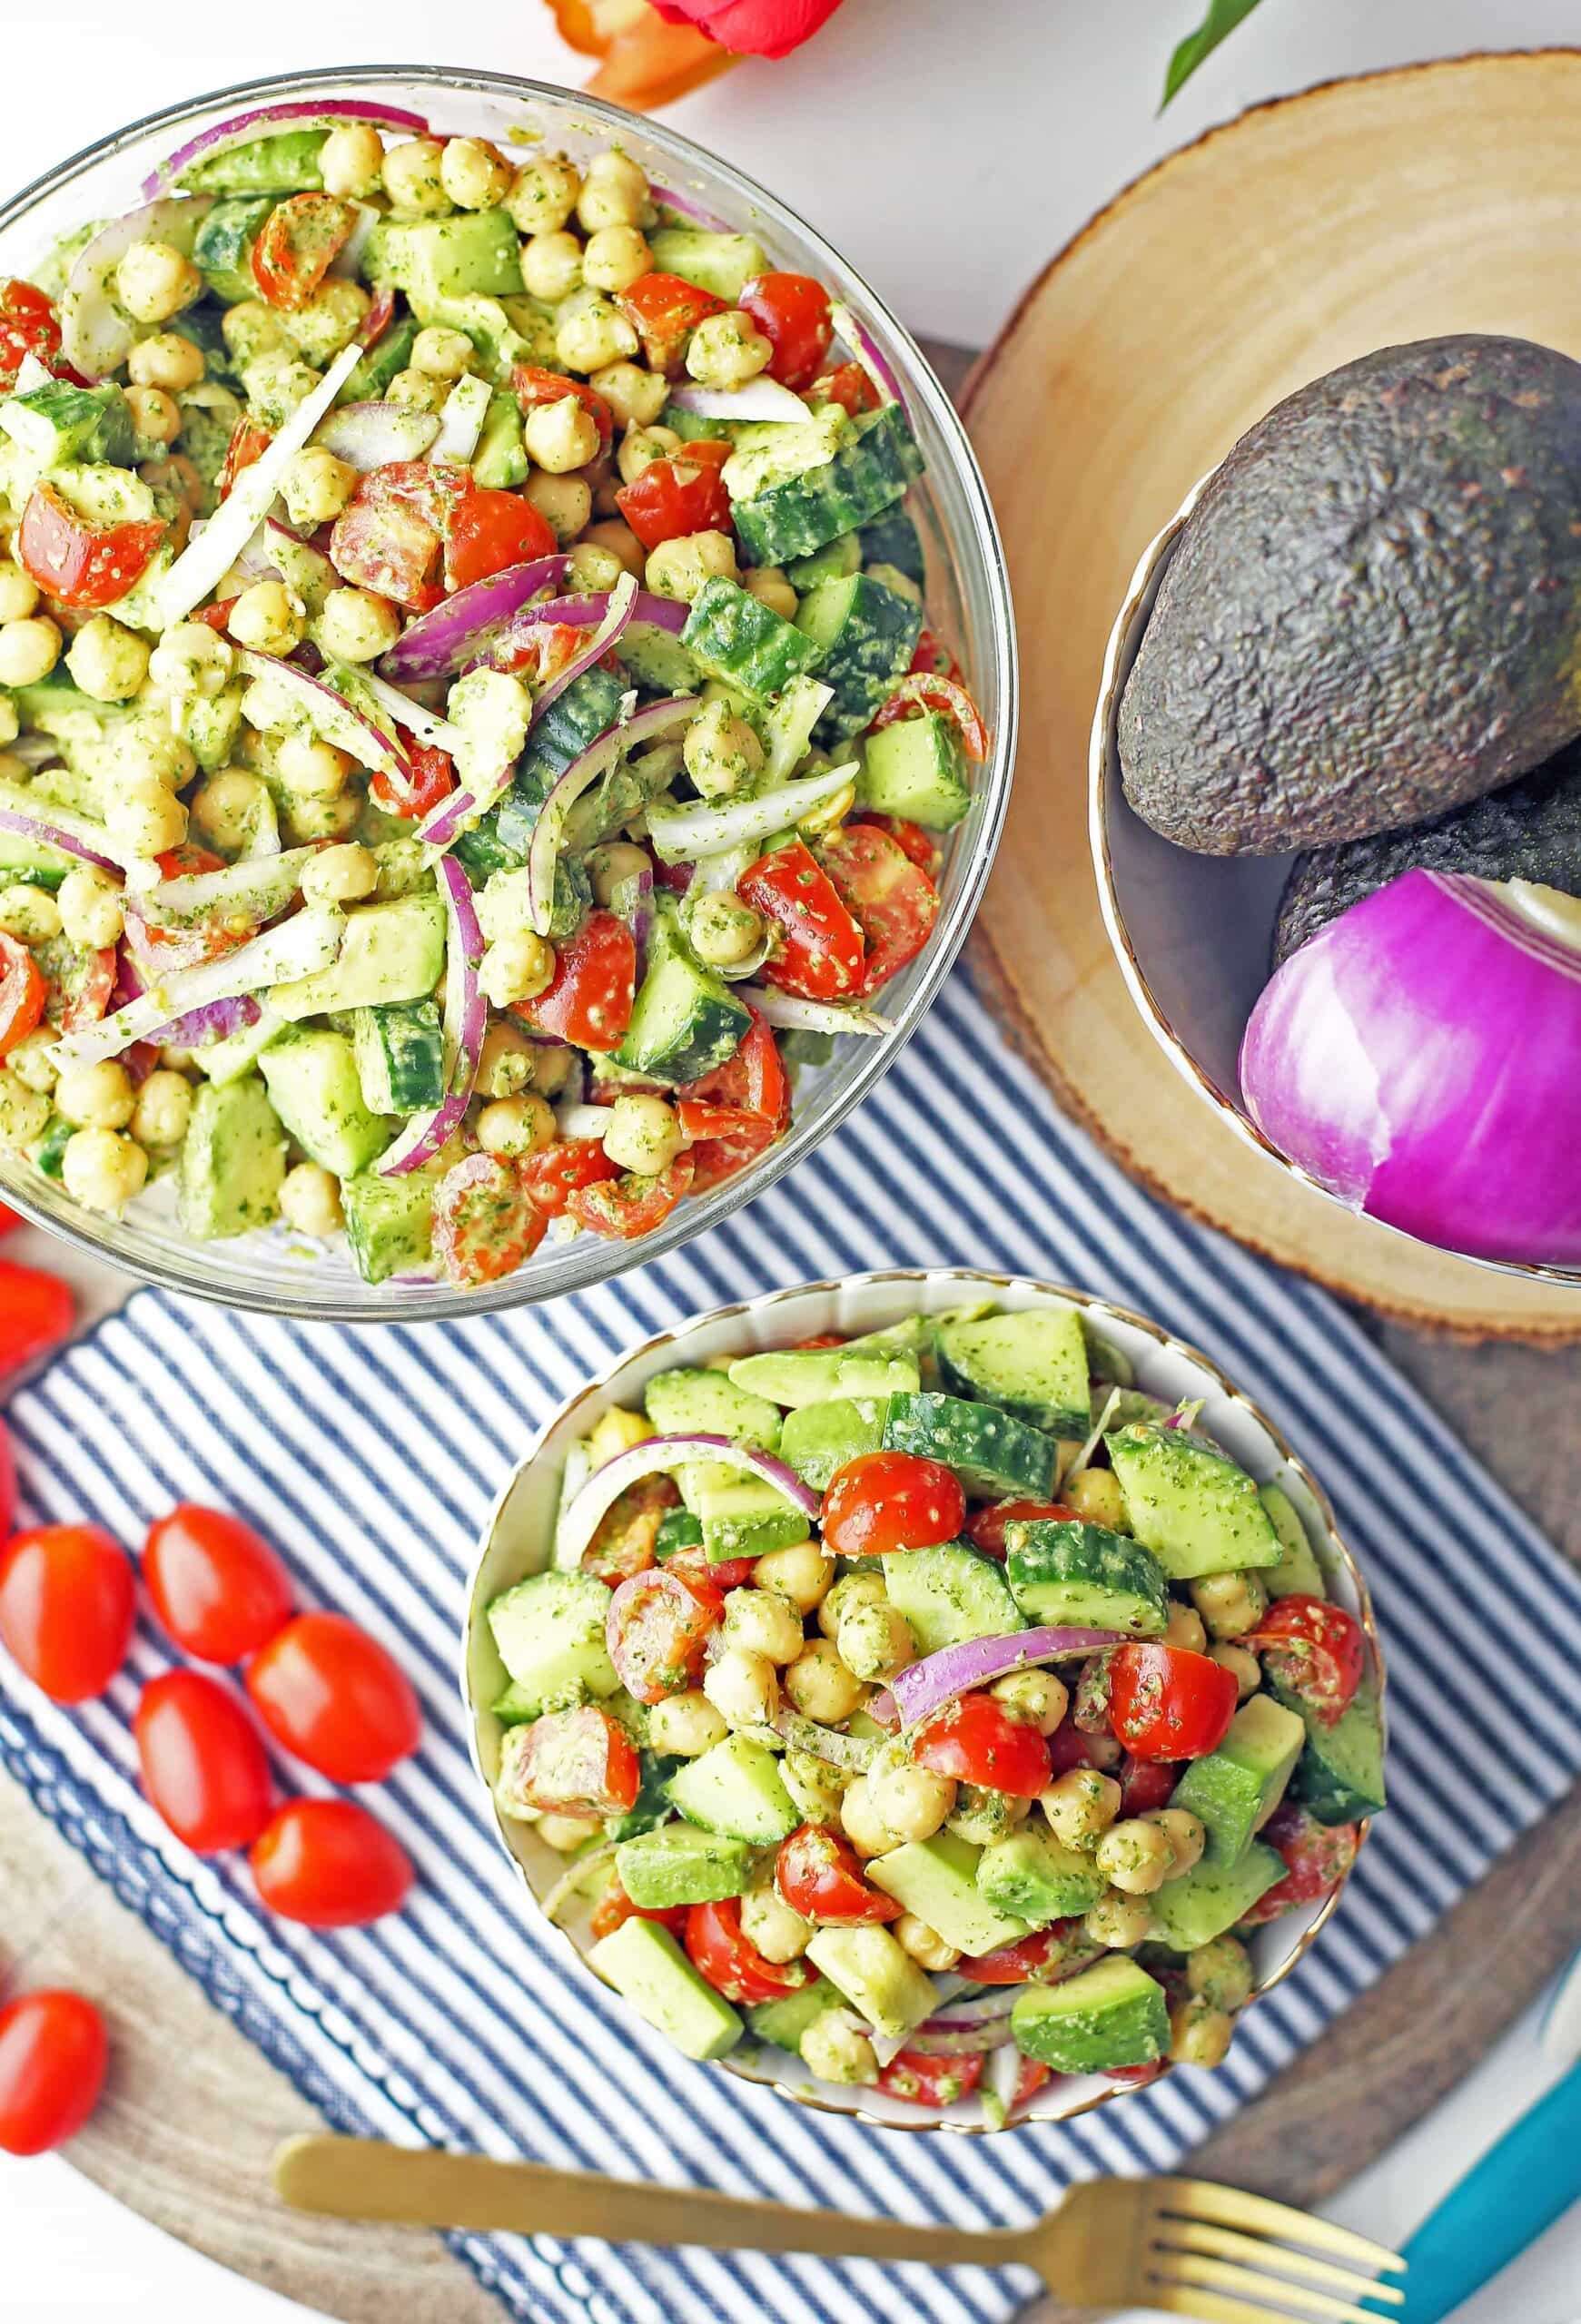 Chickpea Cucumber Avocado Salad with Parsley Dressing